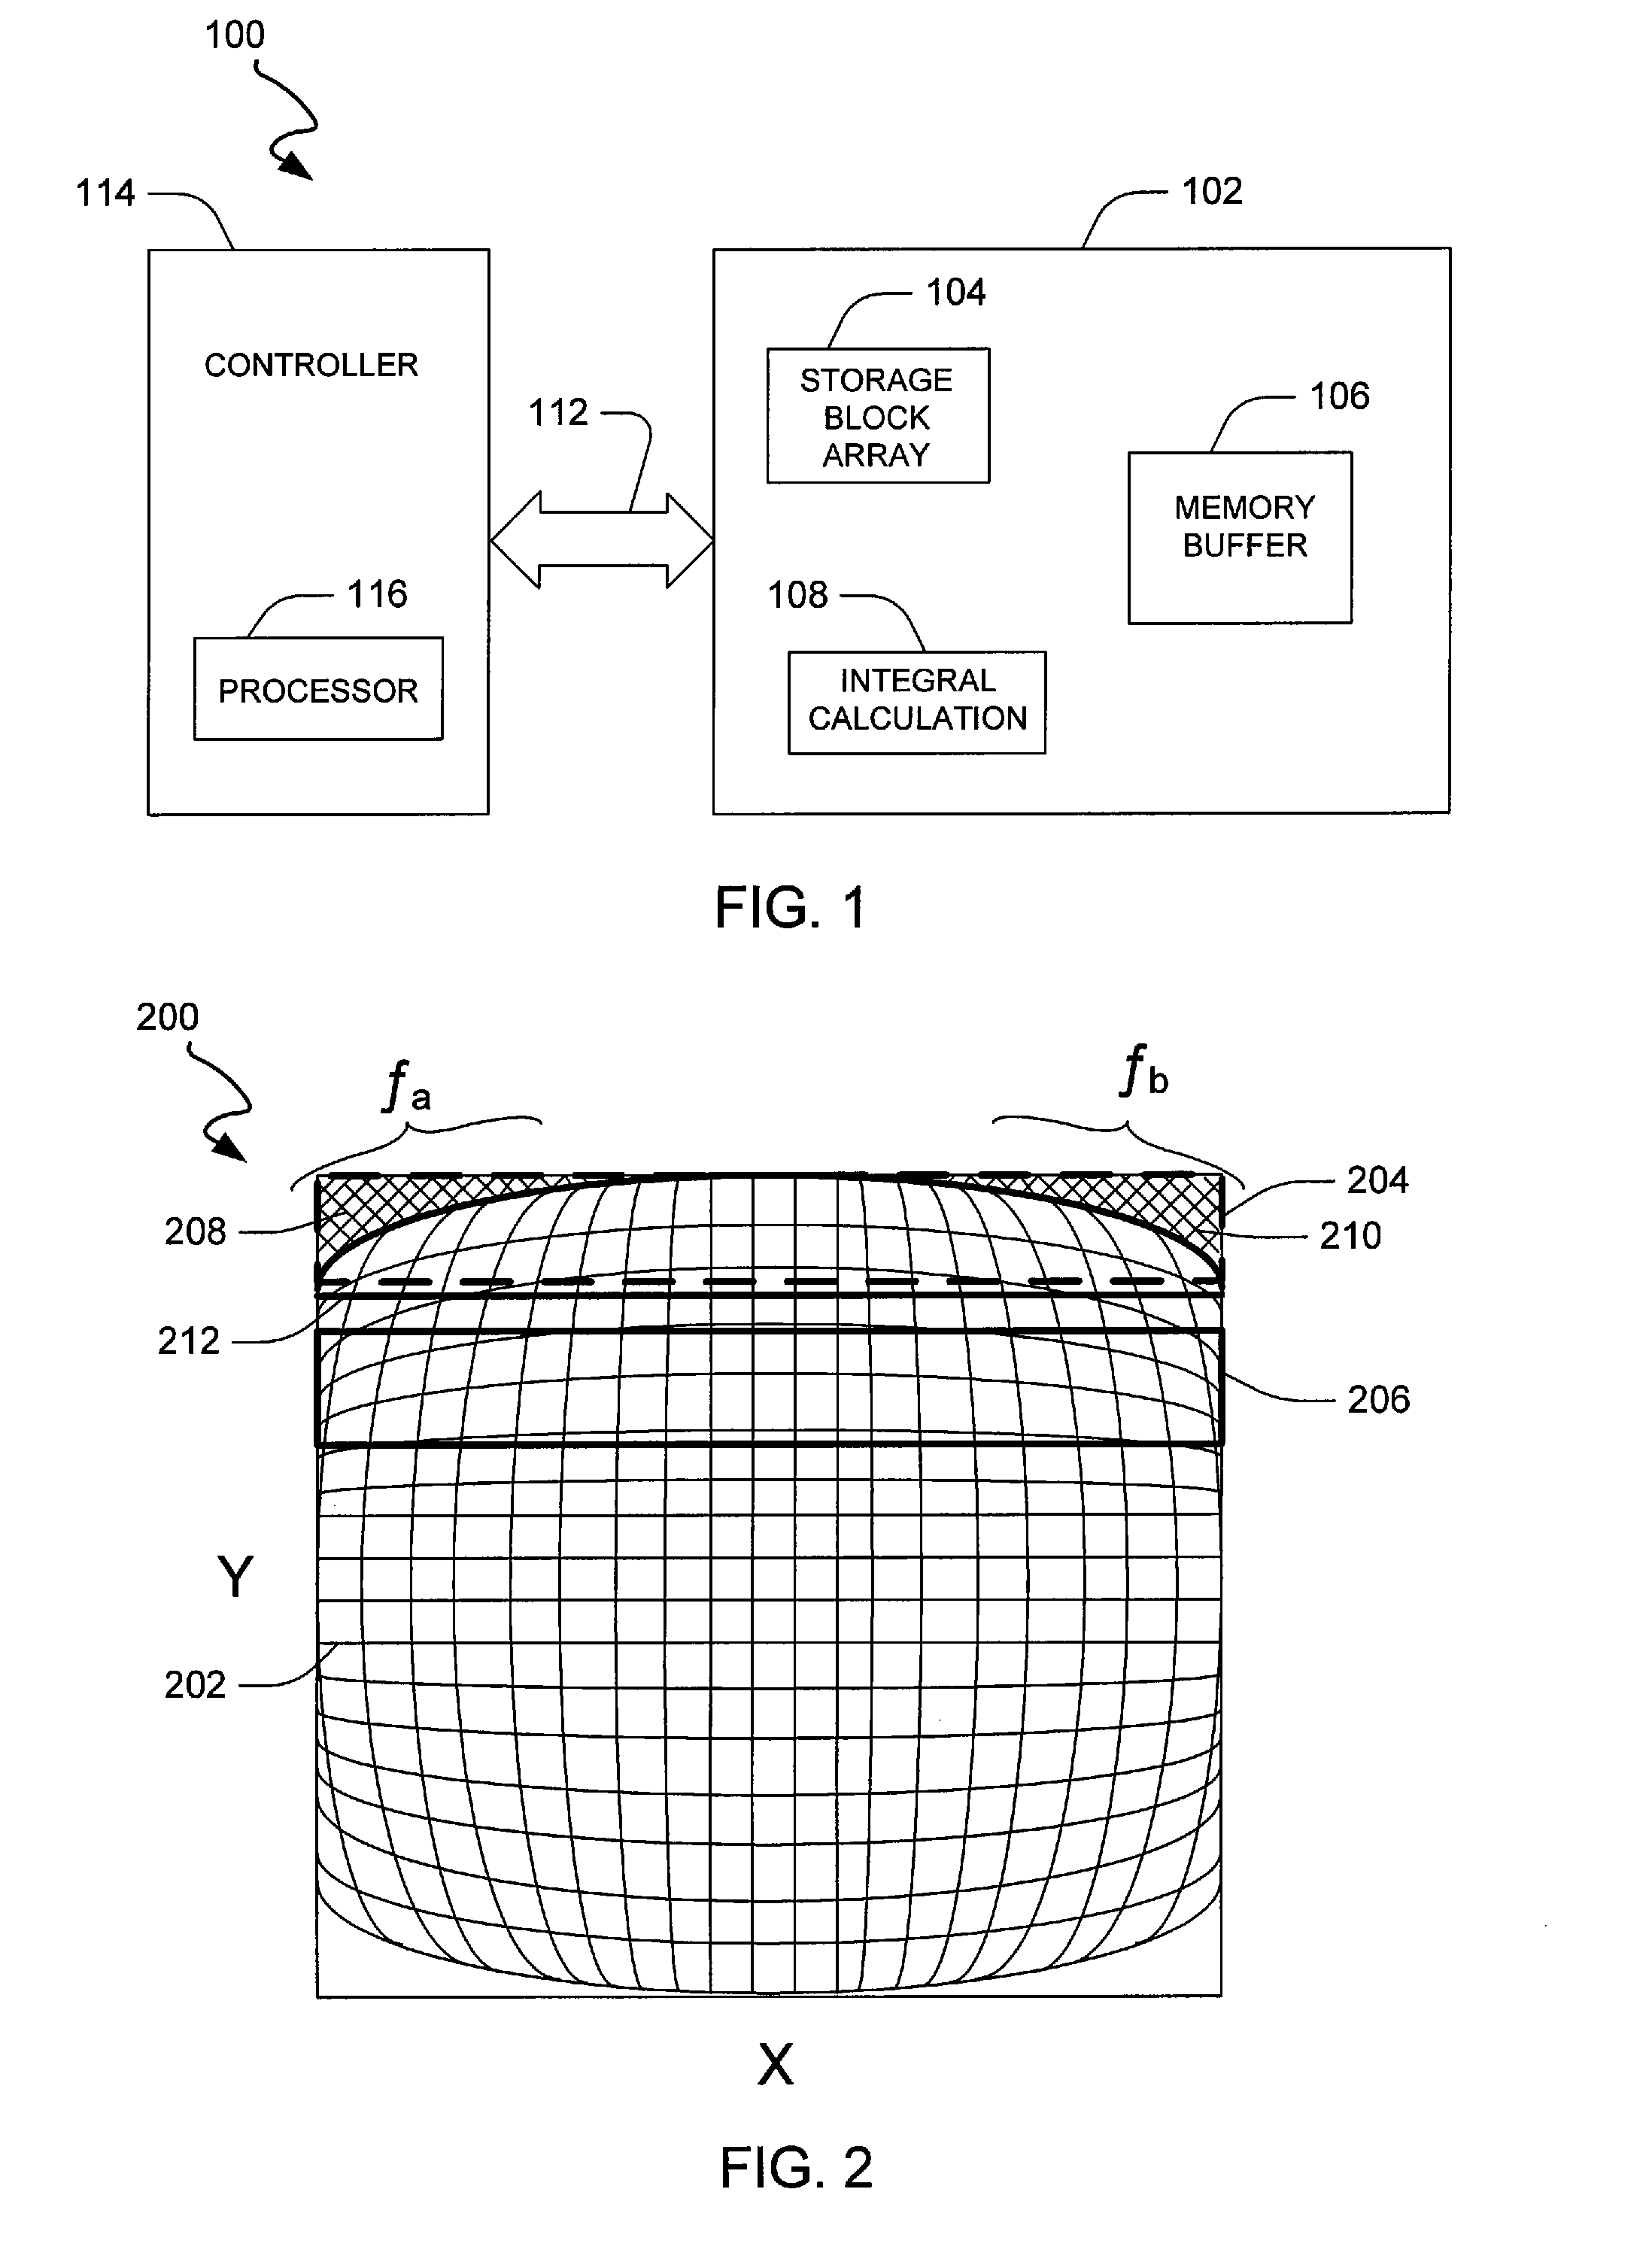 Conformal rolling buffer apparatus, systems, and methods